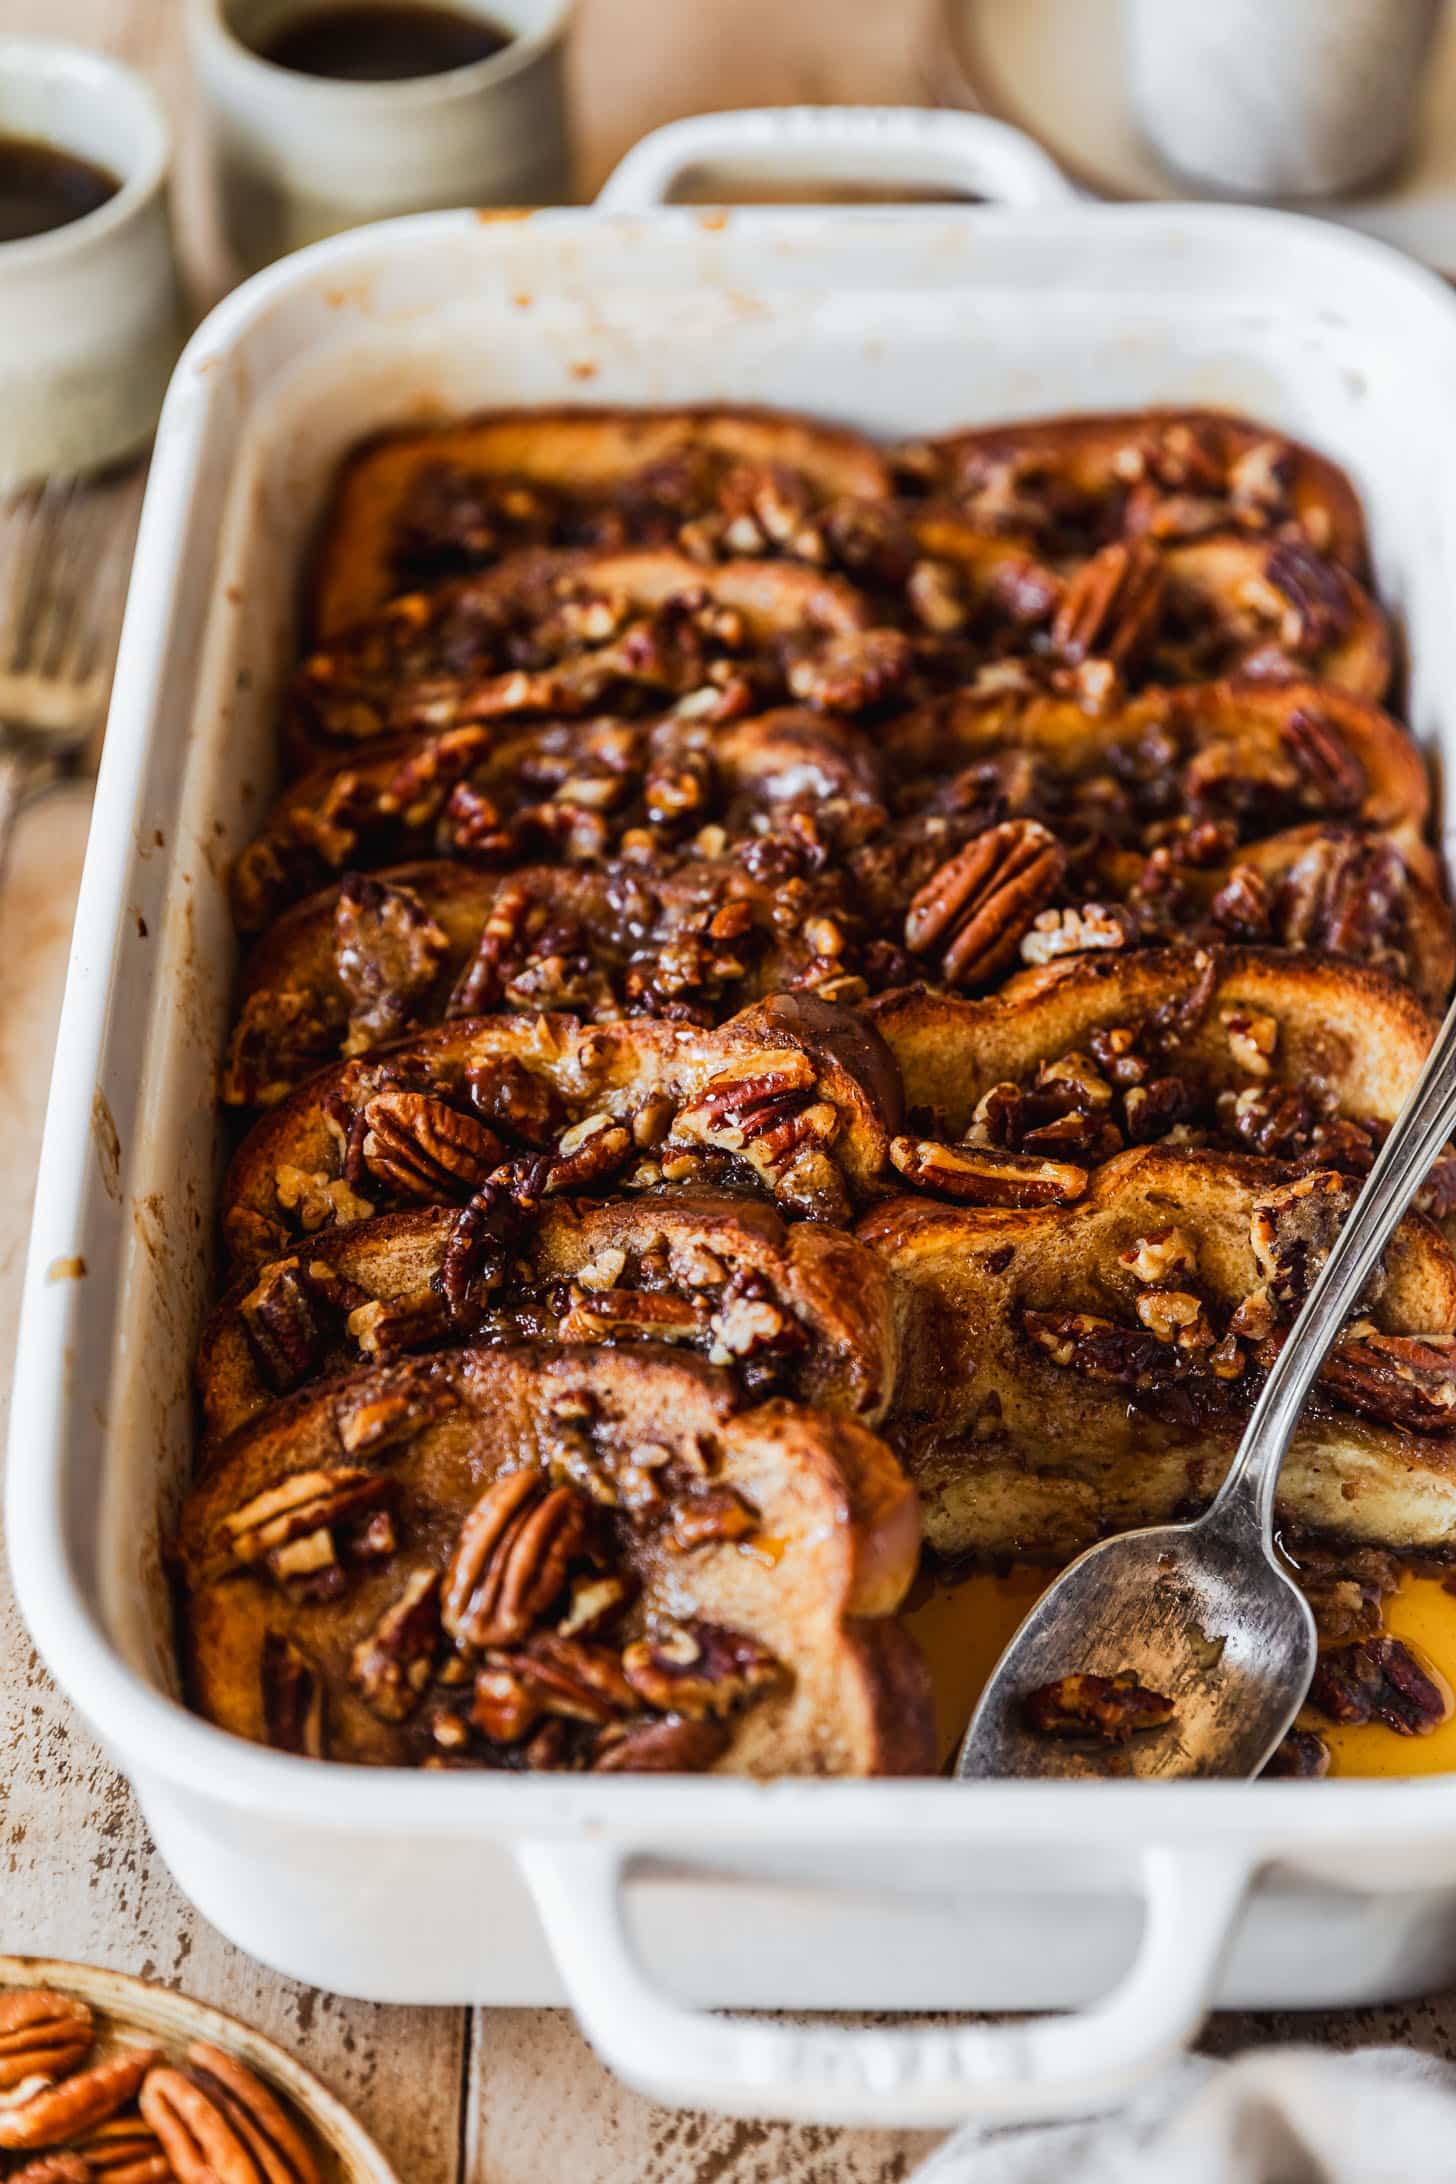 A white pan of pecan brioche French toast casserole on a wood table next to a beige linen and brown plate of pecans.